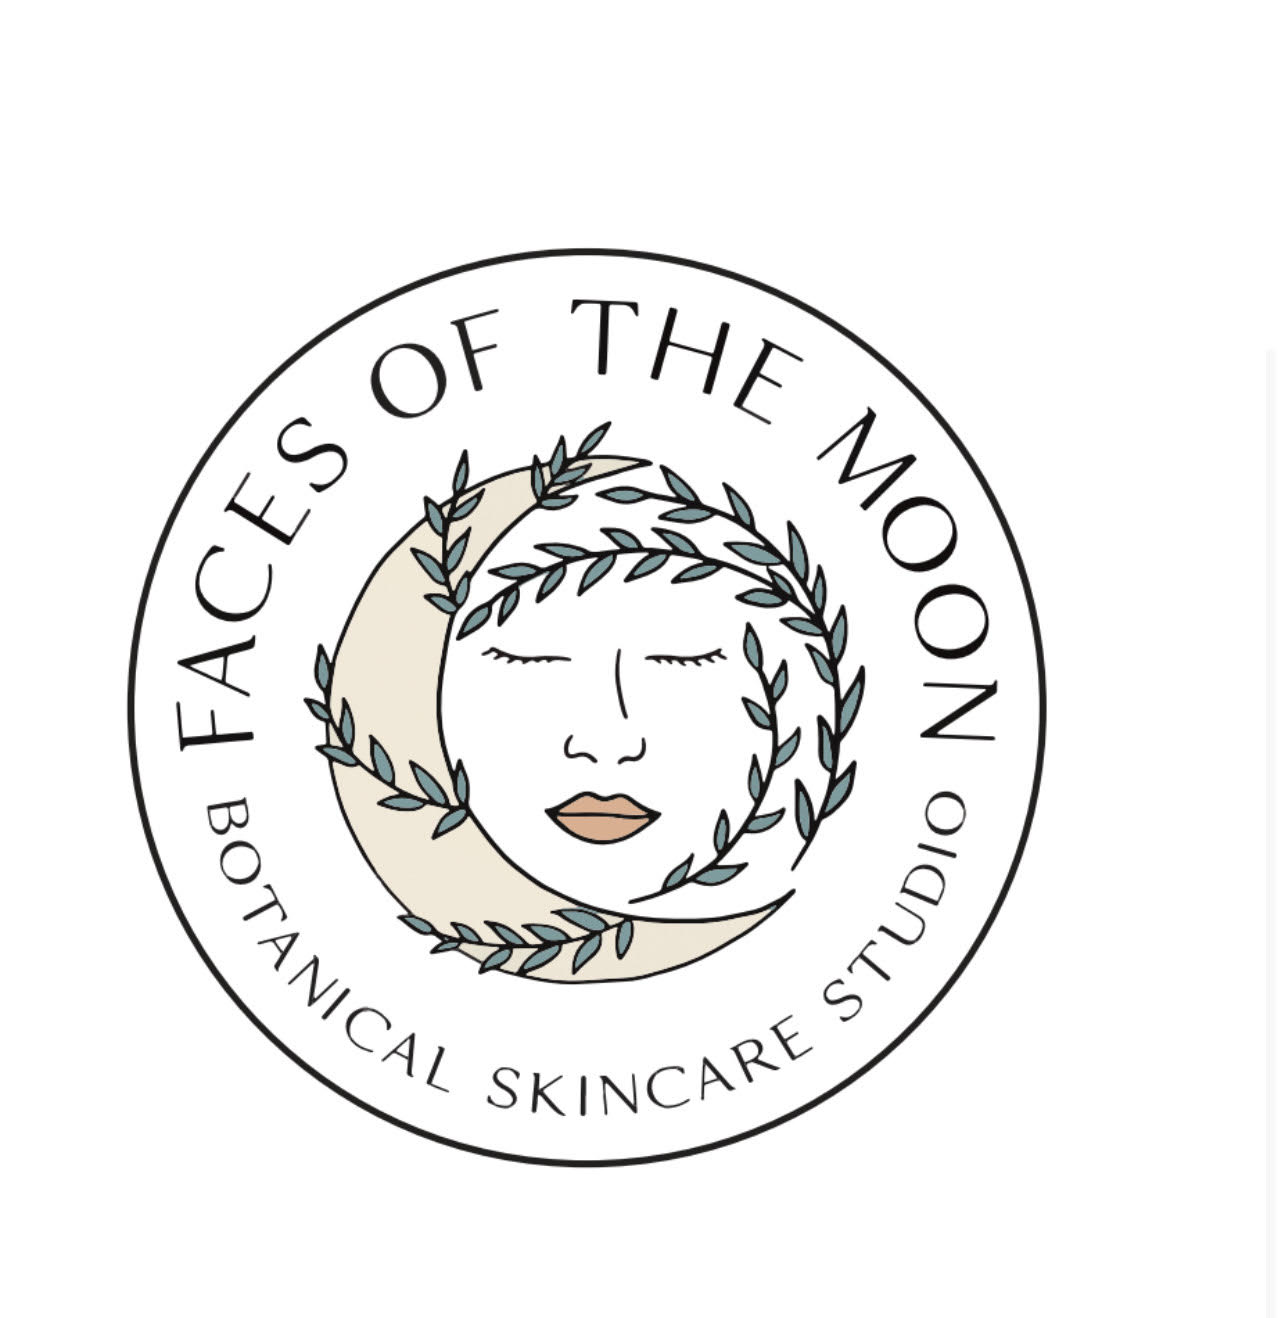 Faces of the Moon